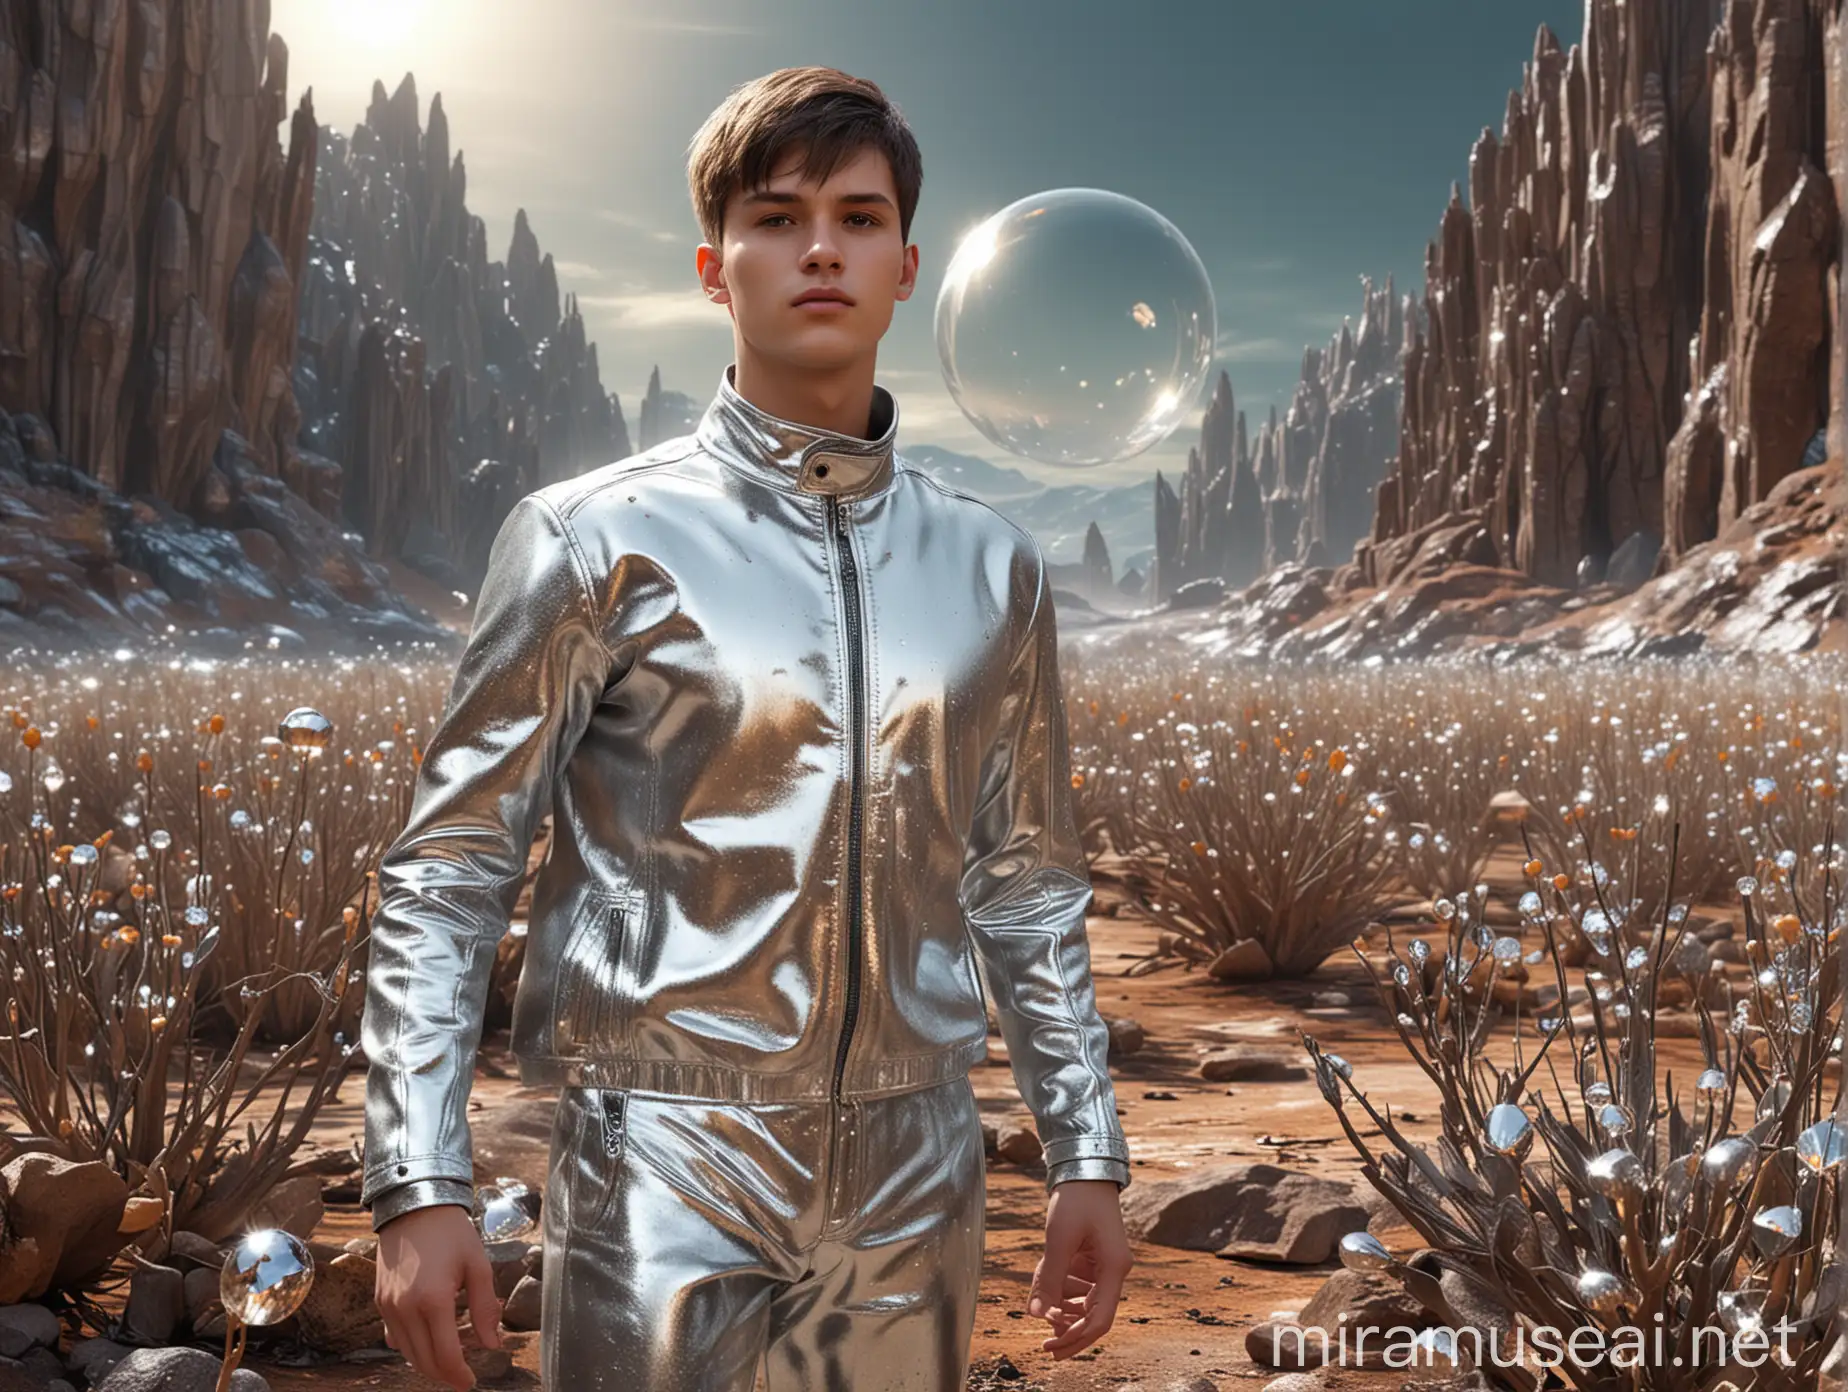 photo realistic, high quality, 19 year old attractive young man, male, ((european perfect face)), dark straight short hair, wearing silver metallic jacket and pants, standing, dynamic poses, background is surface of a distant alien planet, sheer crystal glass formations rise from the vibrant landscape, (strange alien bulbous treeplants), small golden conchs and shells, rocky terrain, low angle view